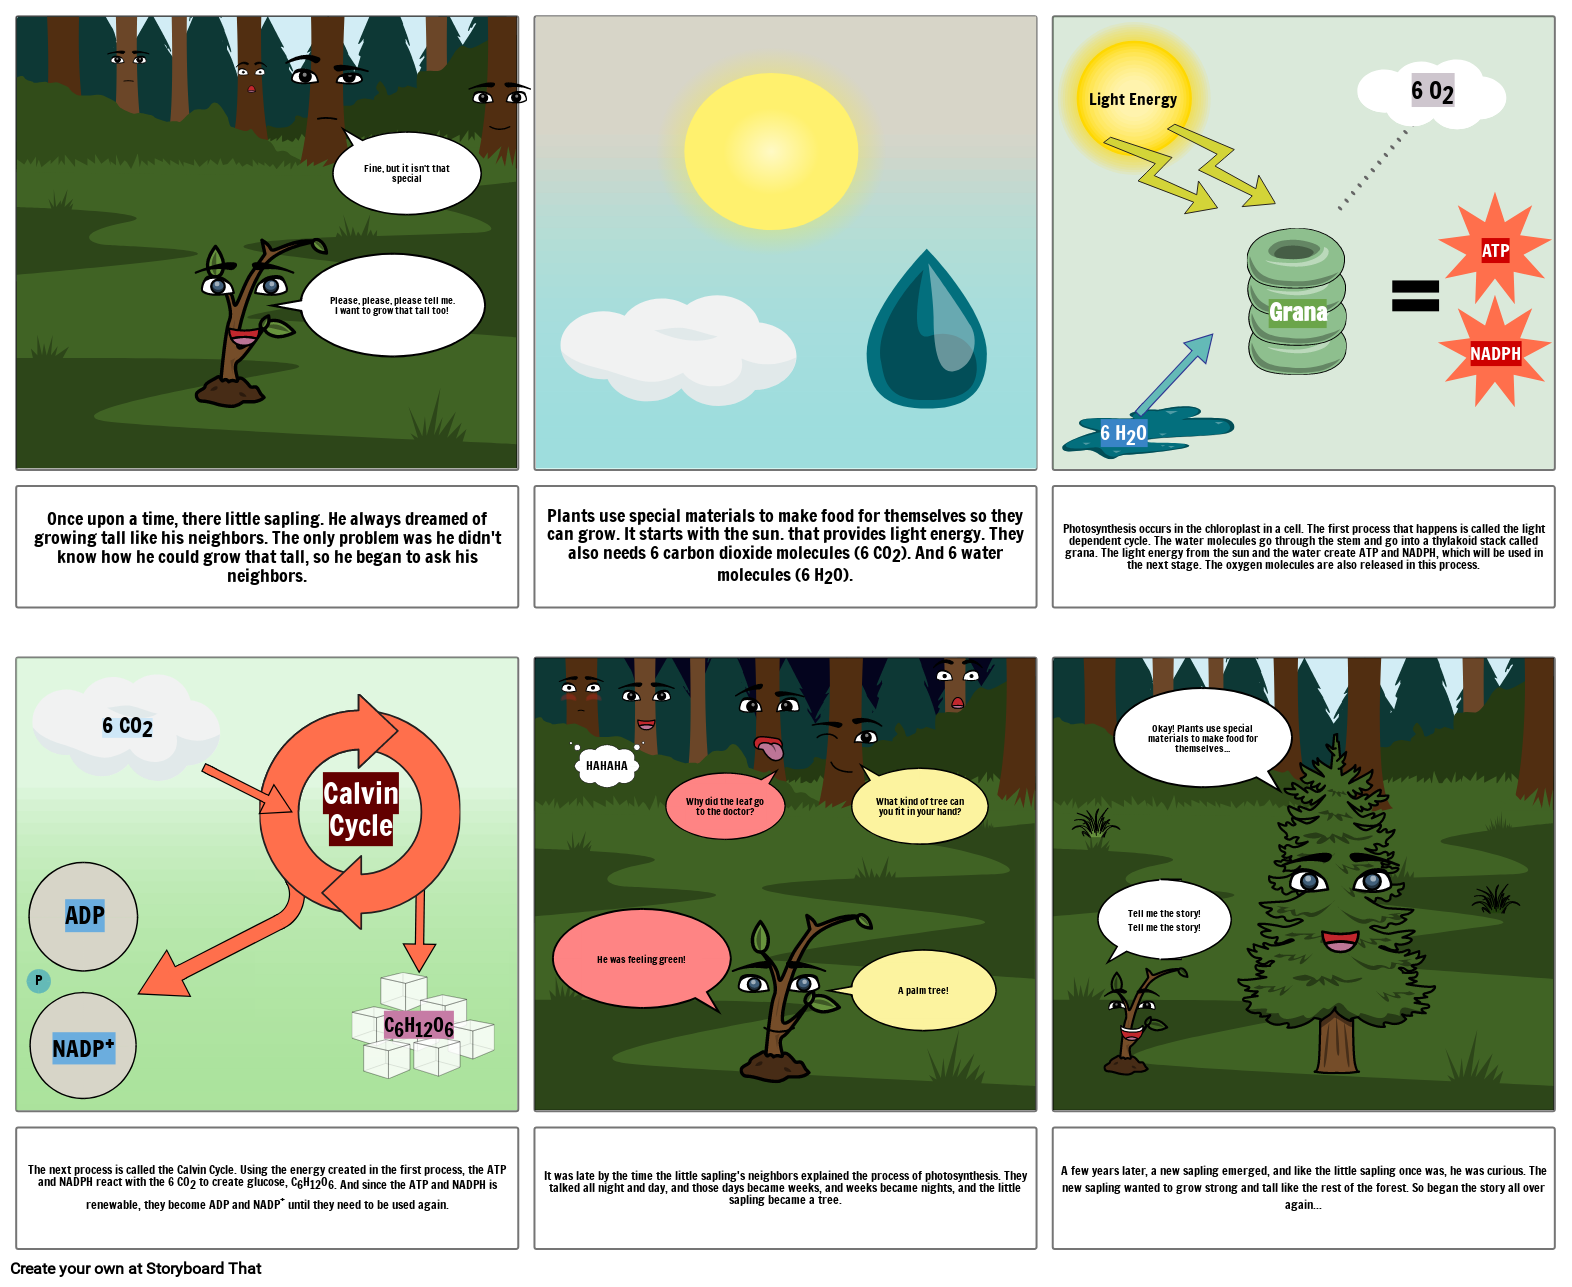 the-process-of-photosynthesis-storyboard-by-3881f7d5